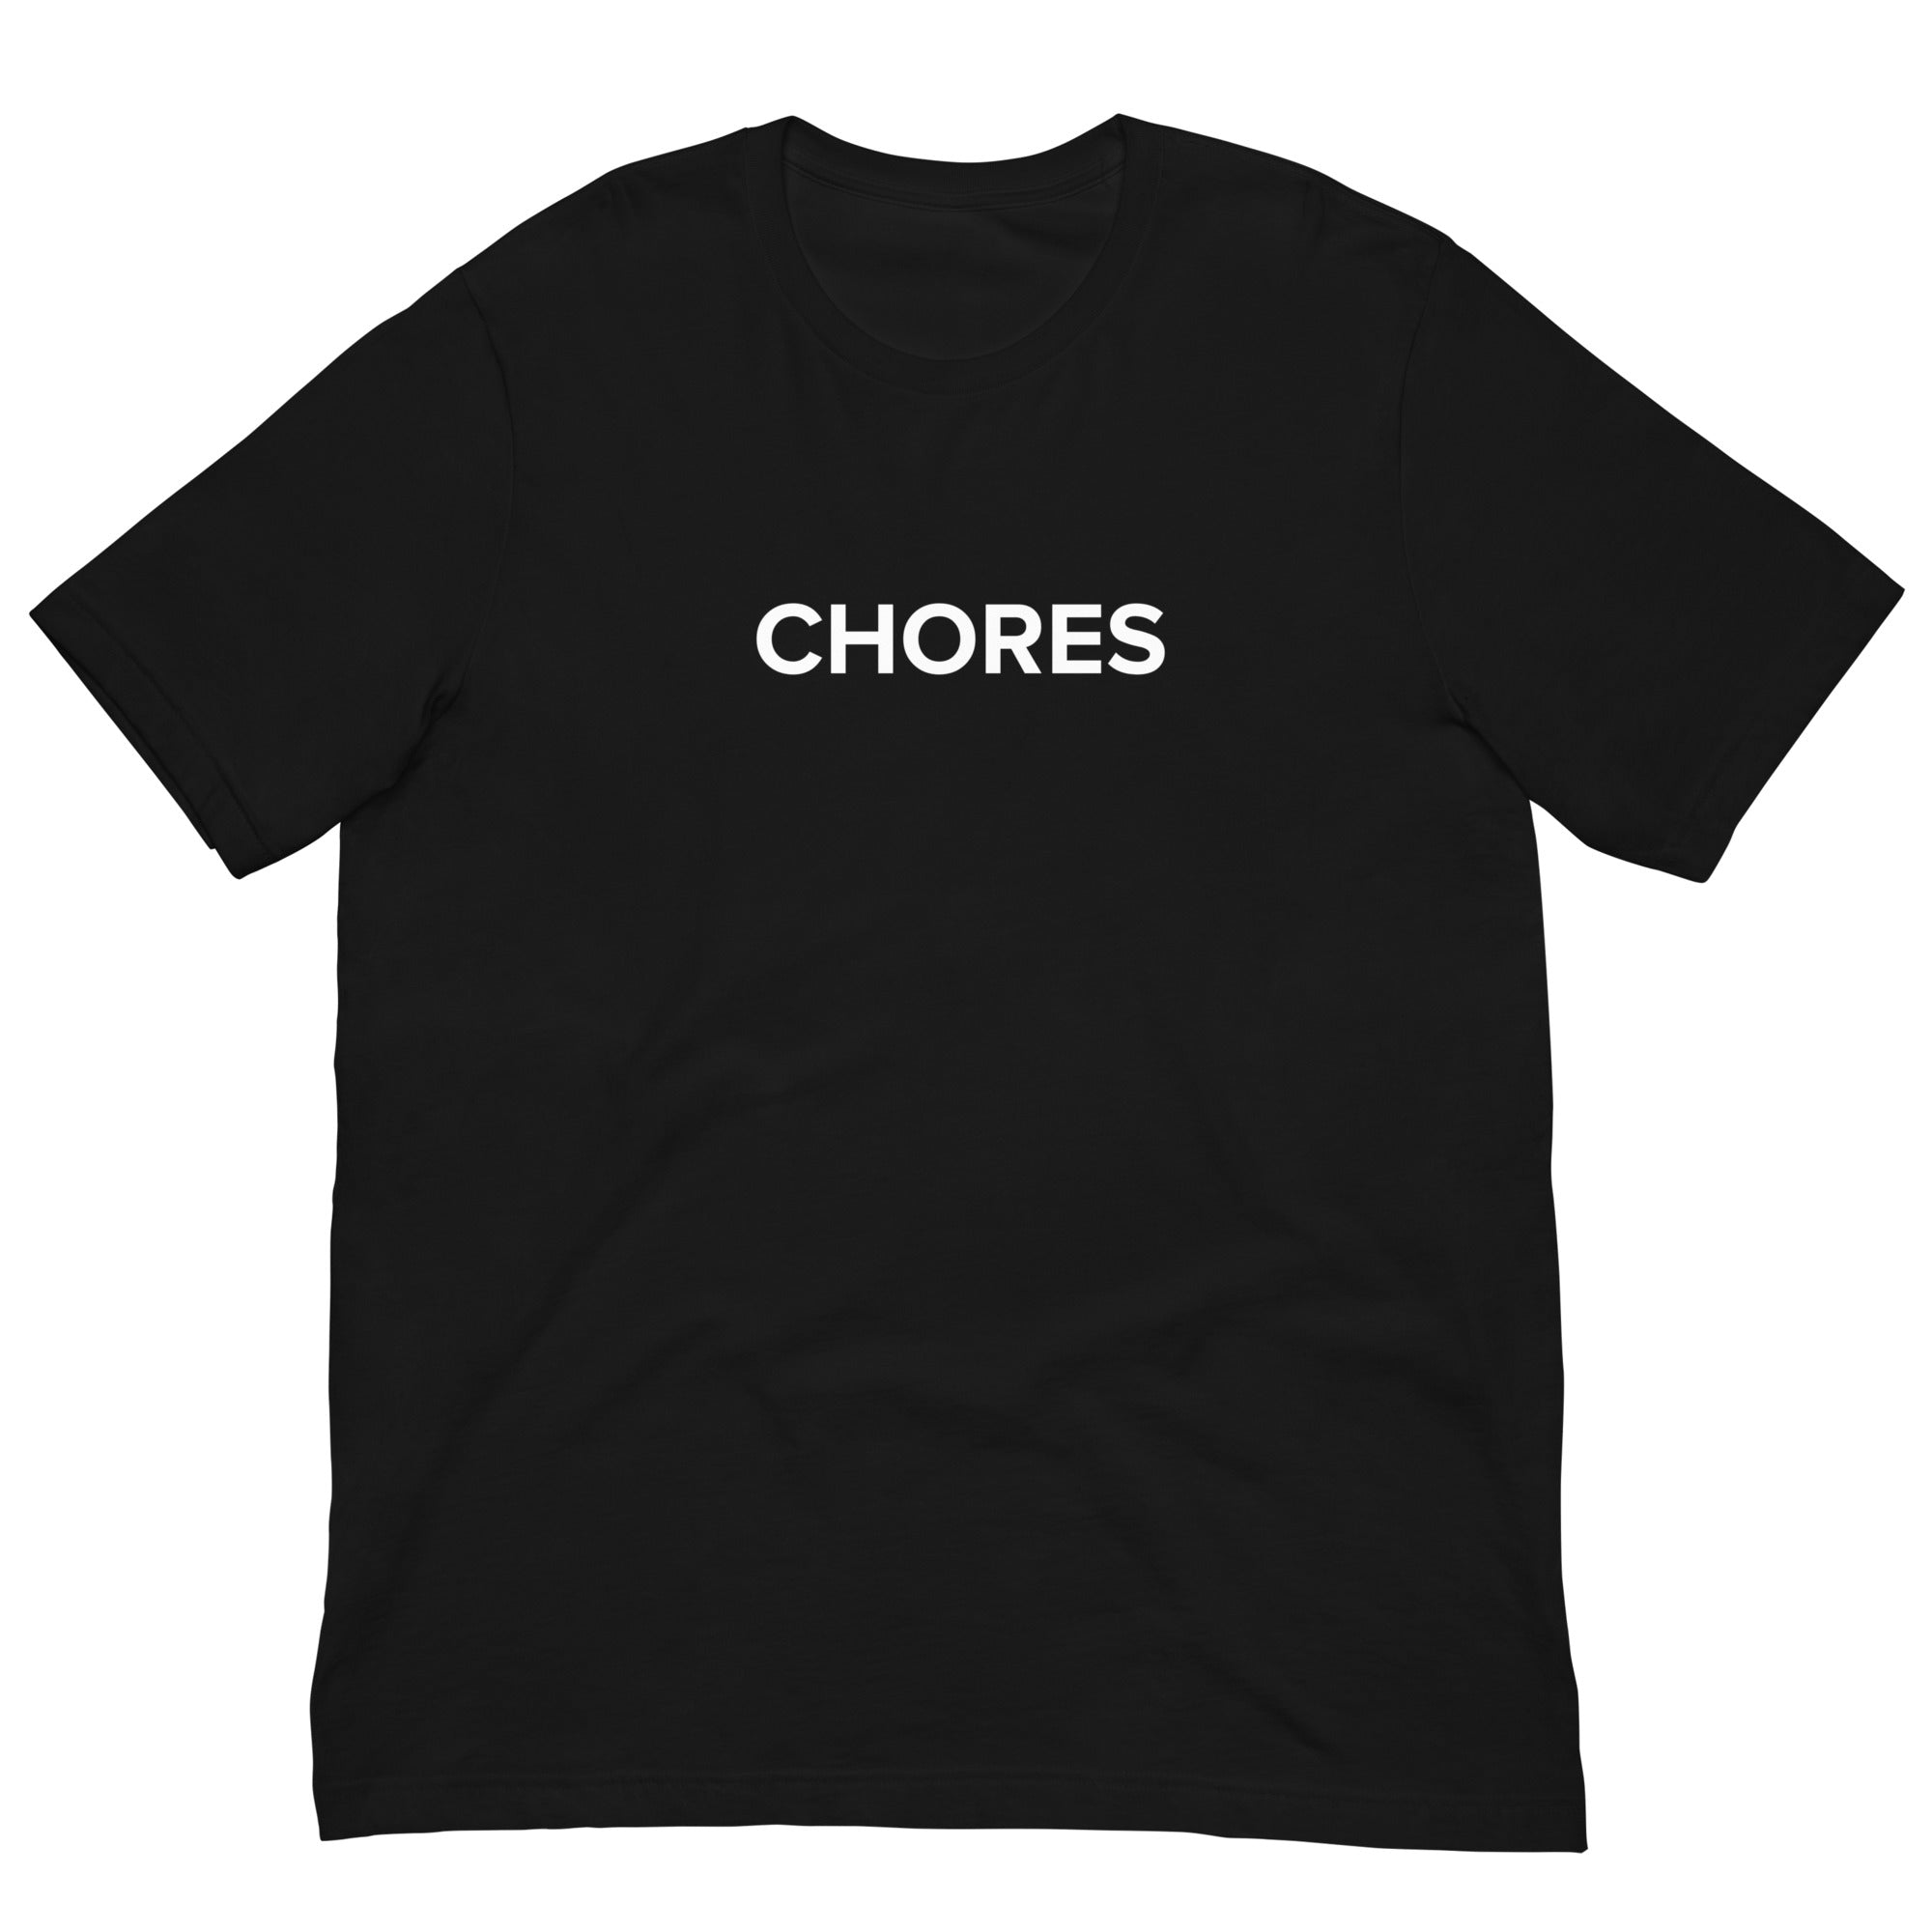 For the dad who loves chores there's this shirt